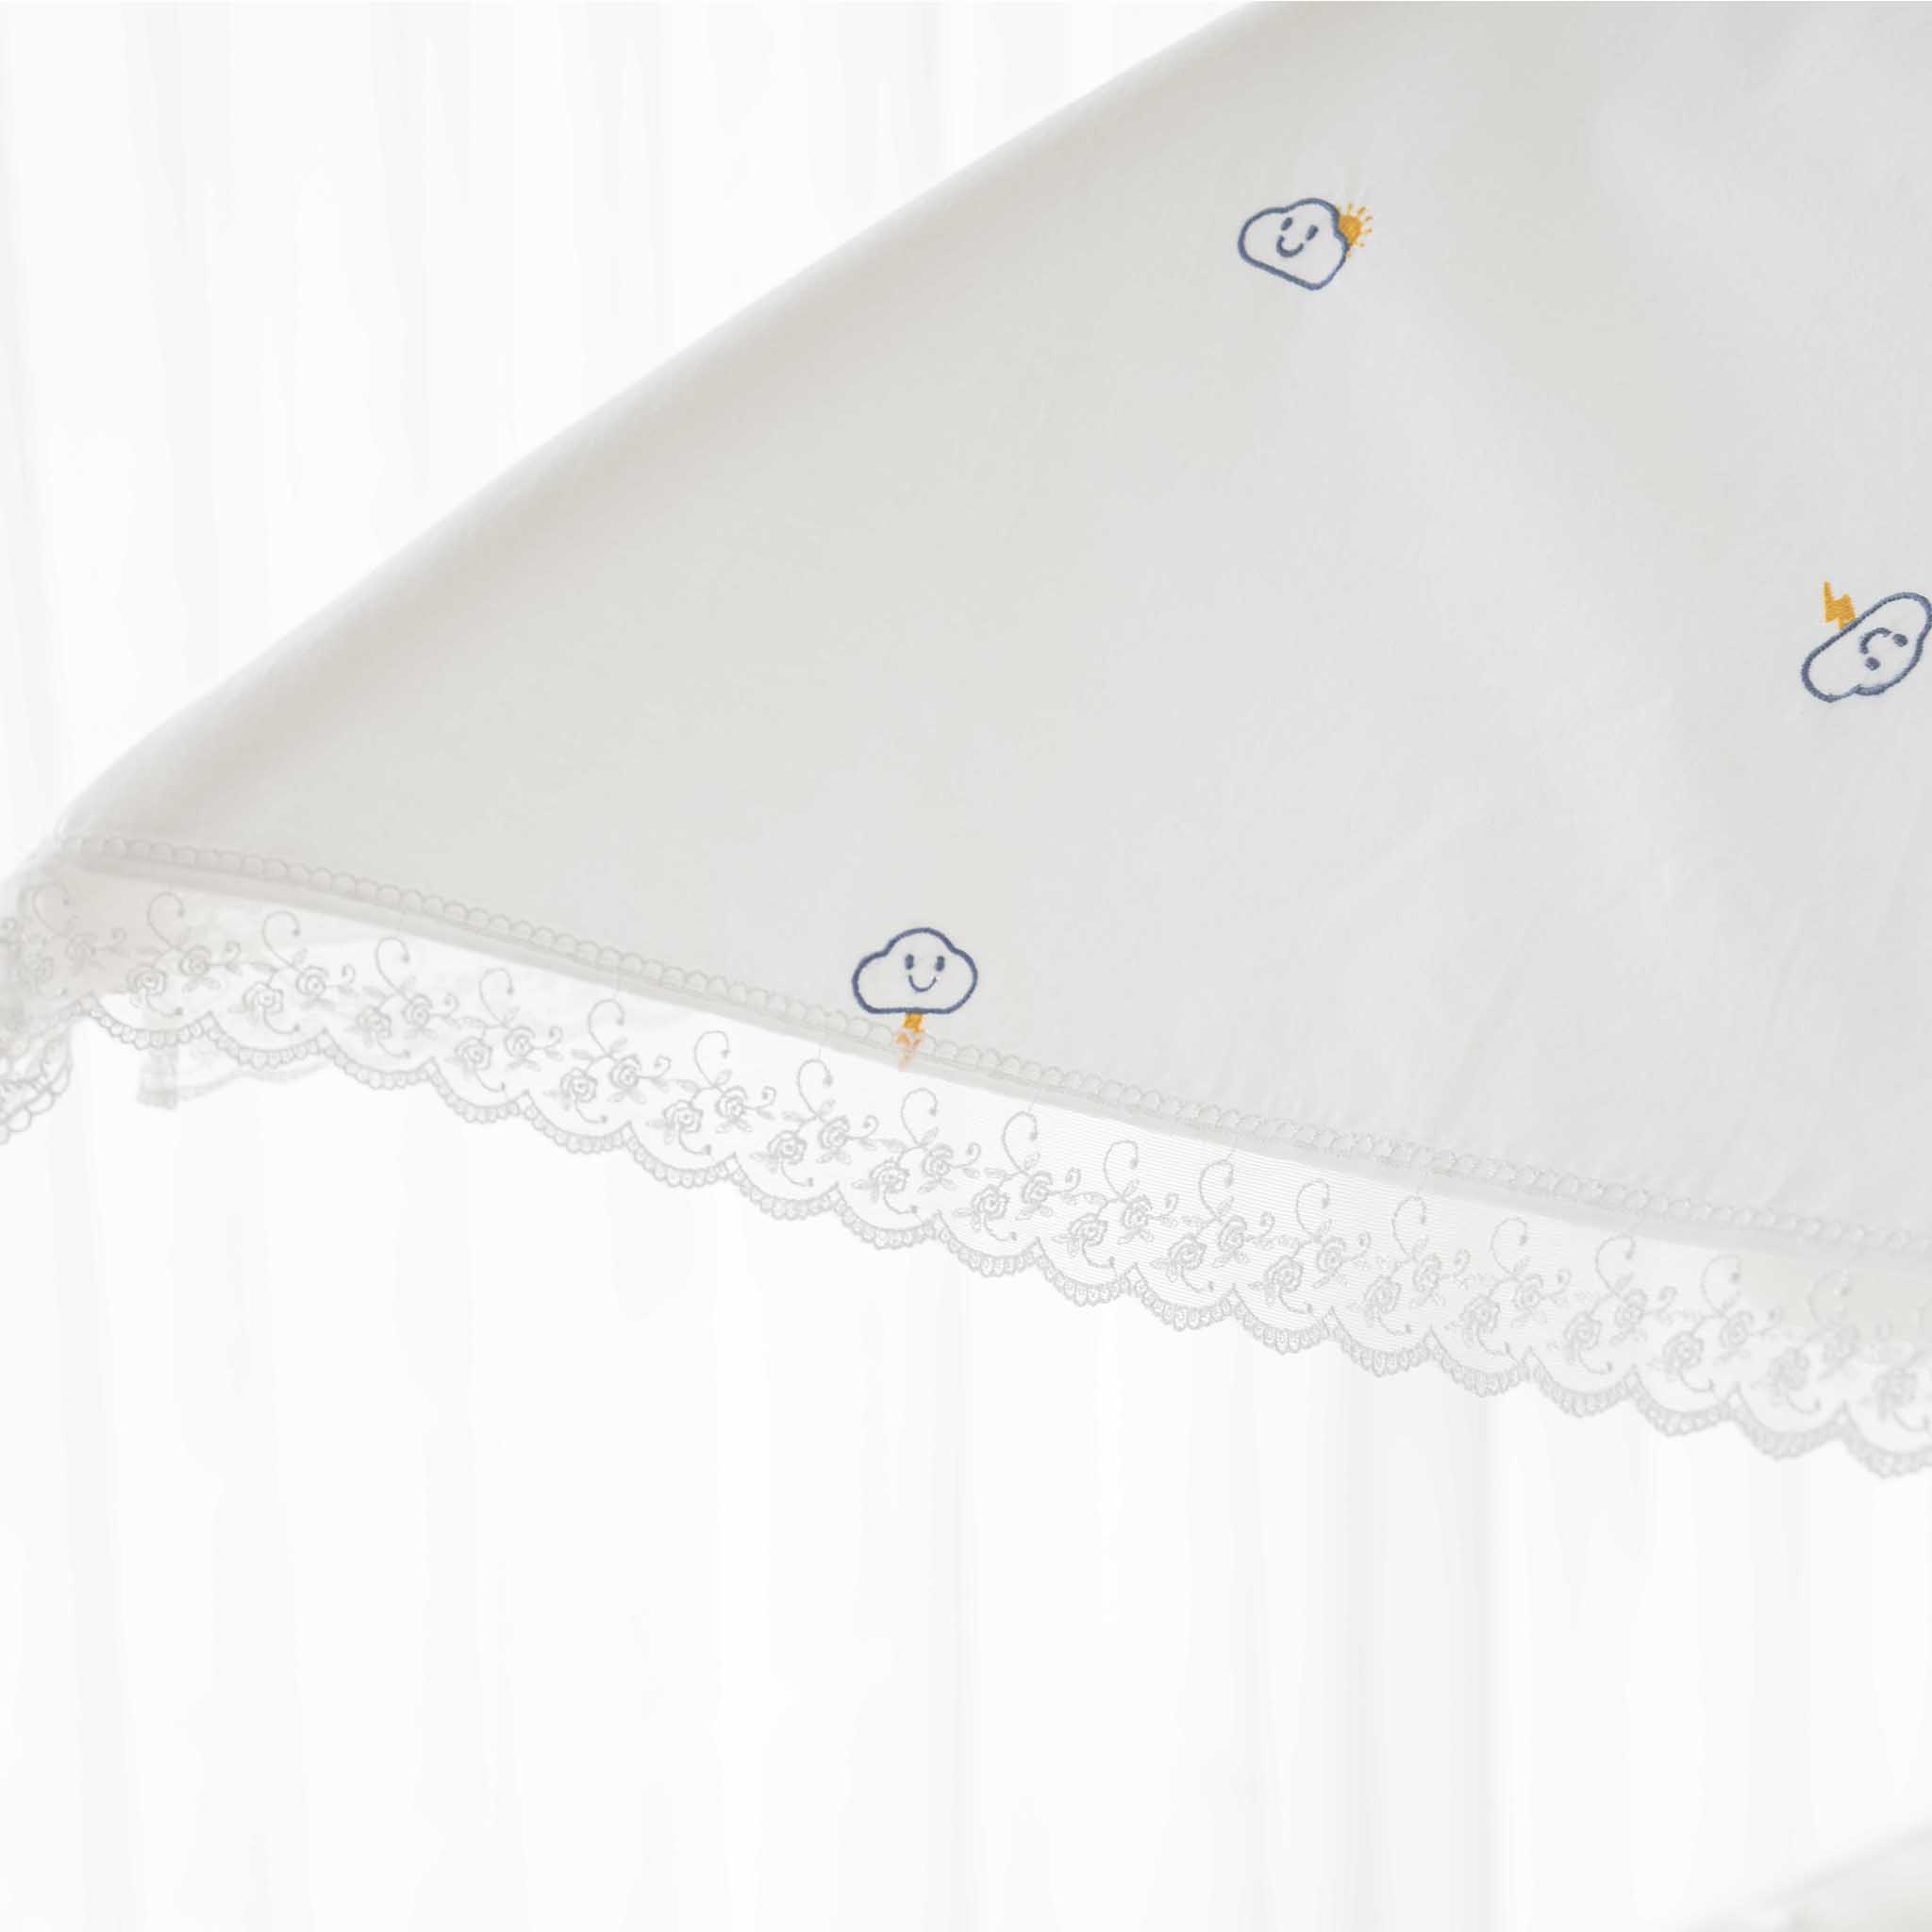 LOLBaby Cotton Embroidery Bumper Bed with Hanging Toy and Canopy - Cloud White